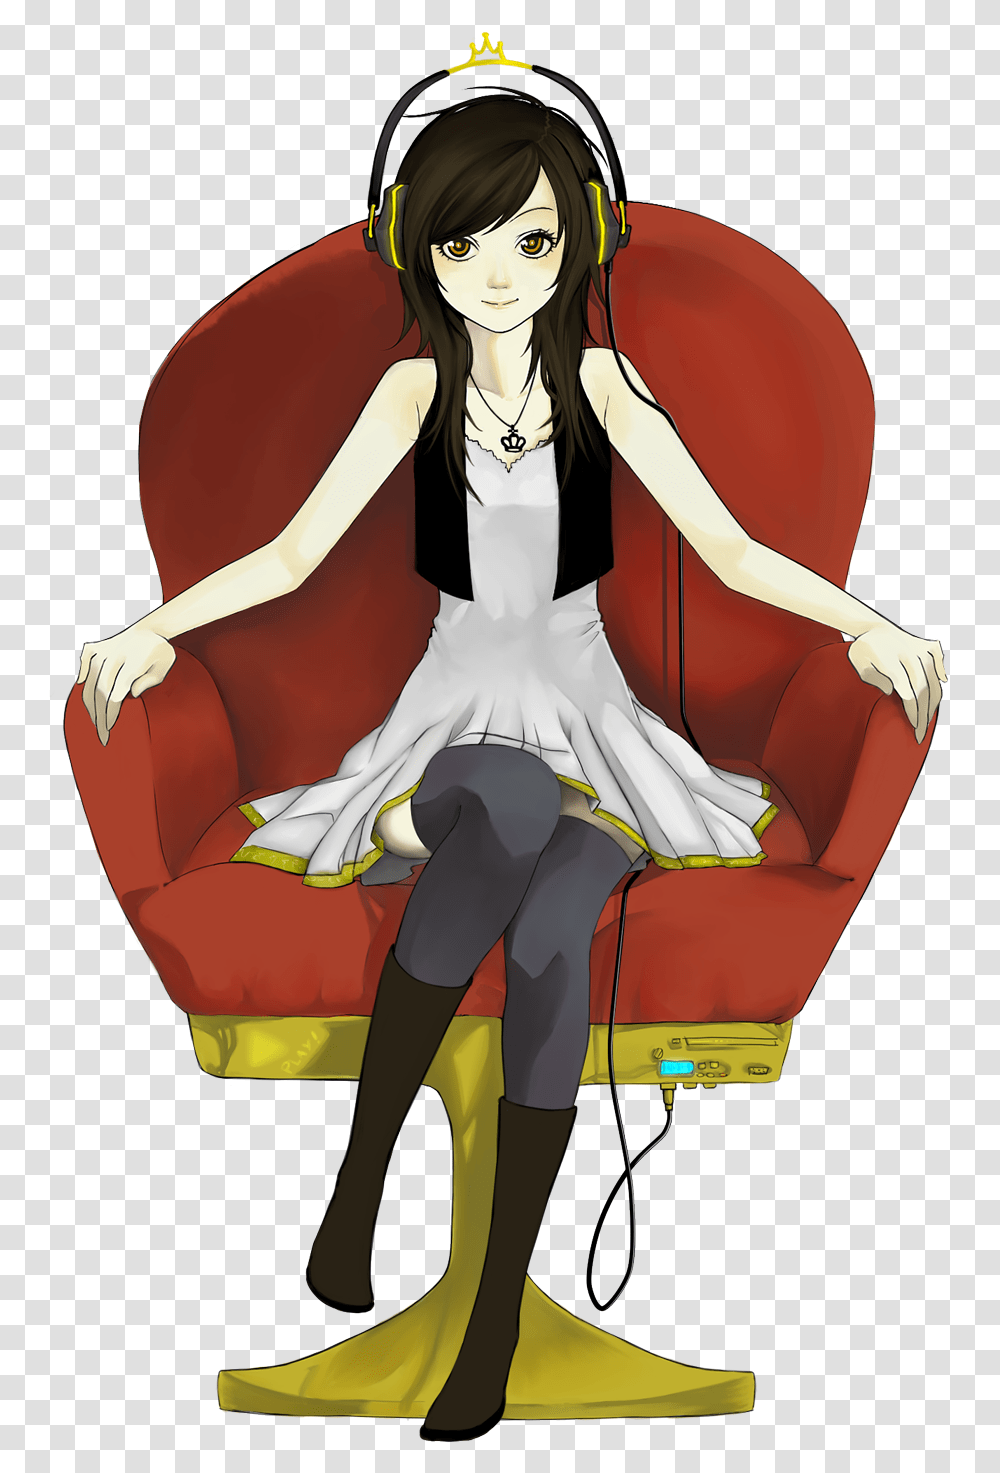 Music Anime Girl Cartoon Girl Sitting In A Chair, Furniture, Couch, Person Transparent Png